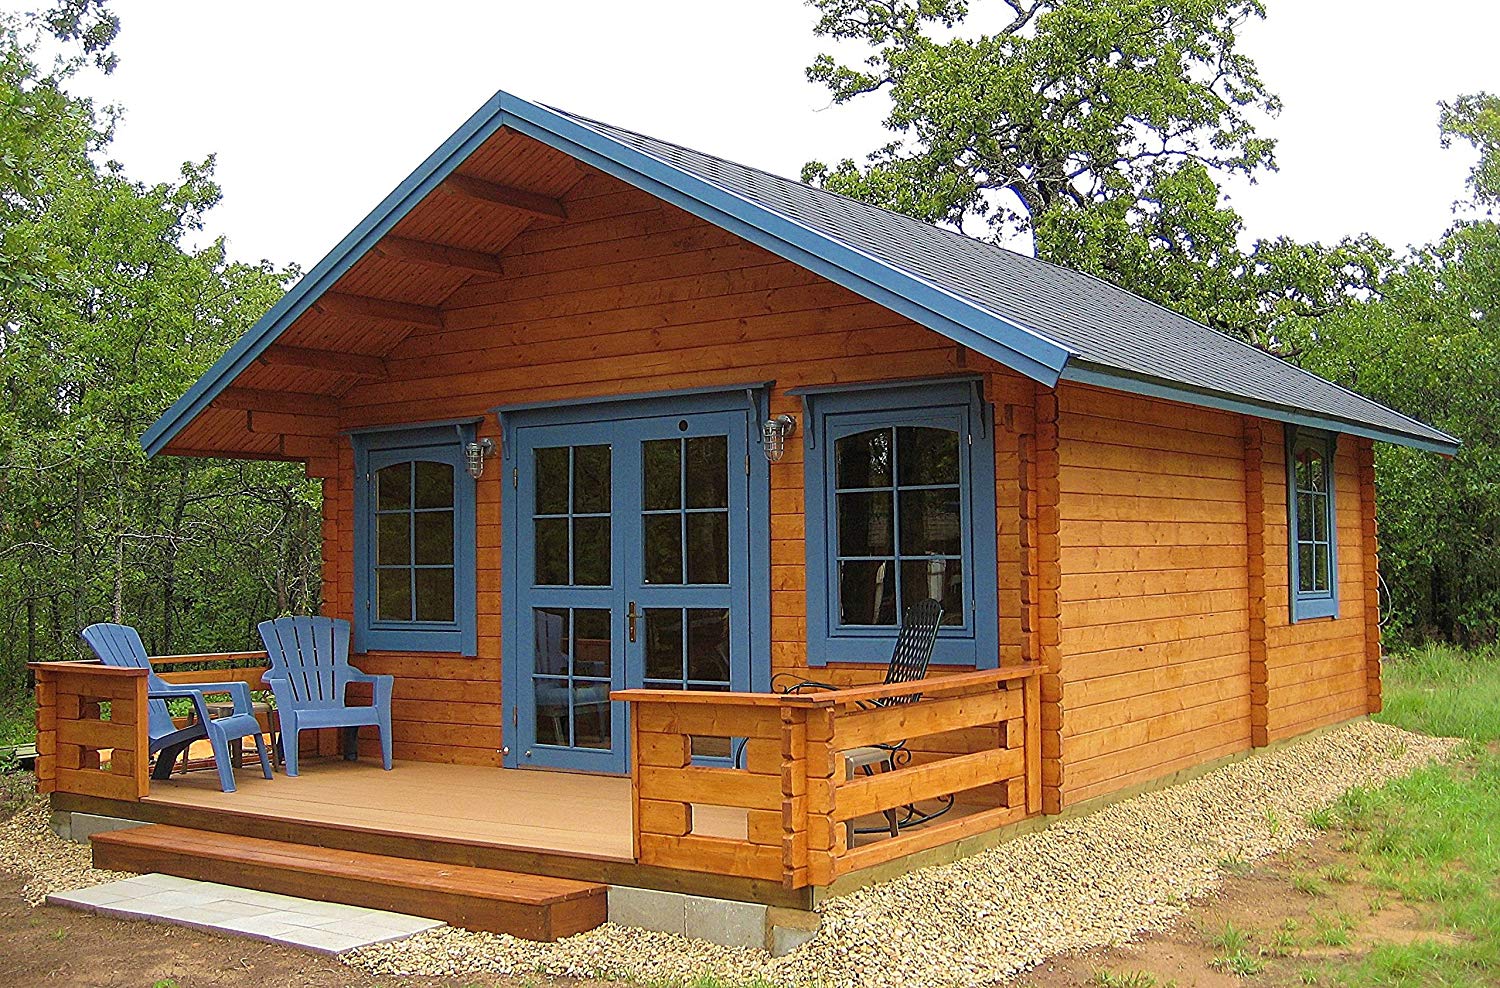 The Lillevilla Allwood Cabin Kit Getaway, on sale for $18,800 on Amazon.